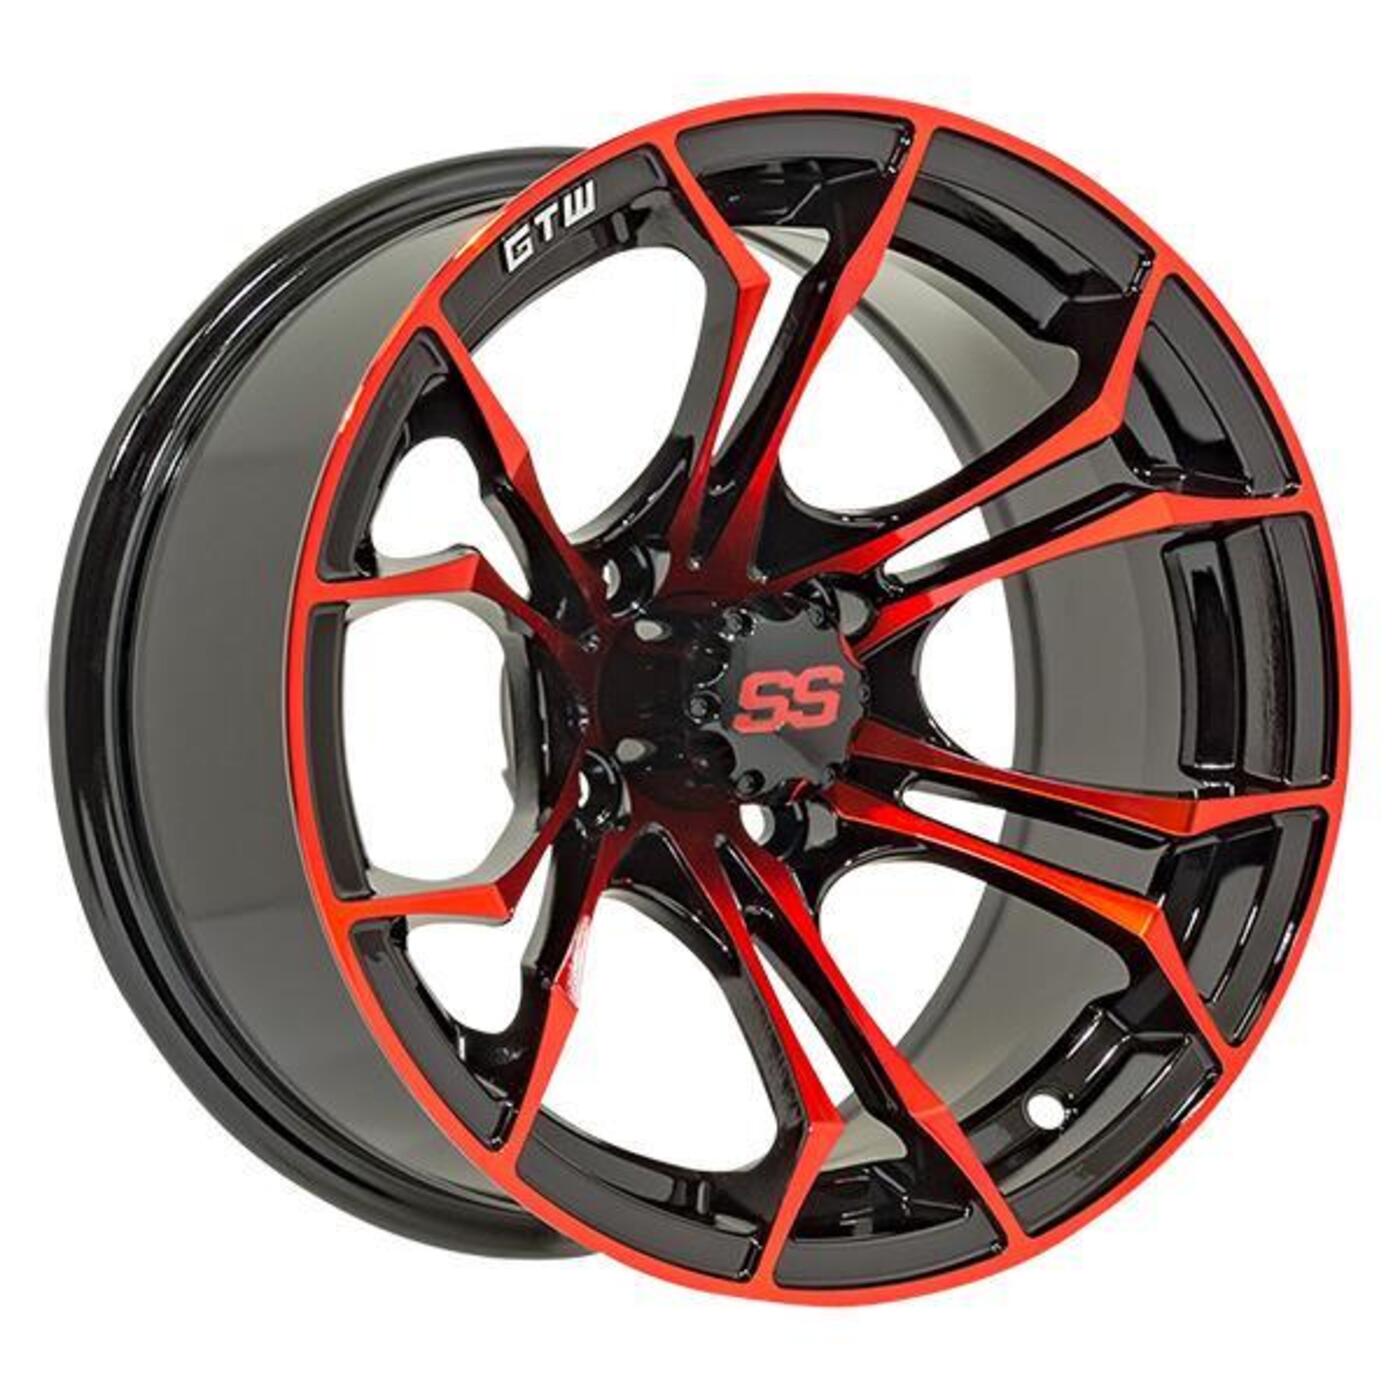 12" GTW Spyder Wheel - Black with Red Accents 19-219